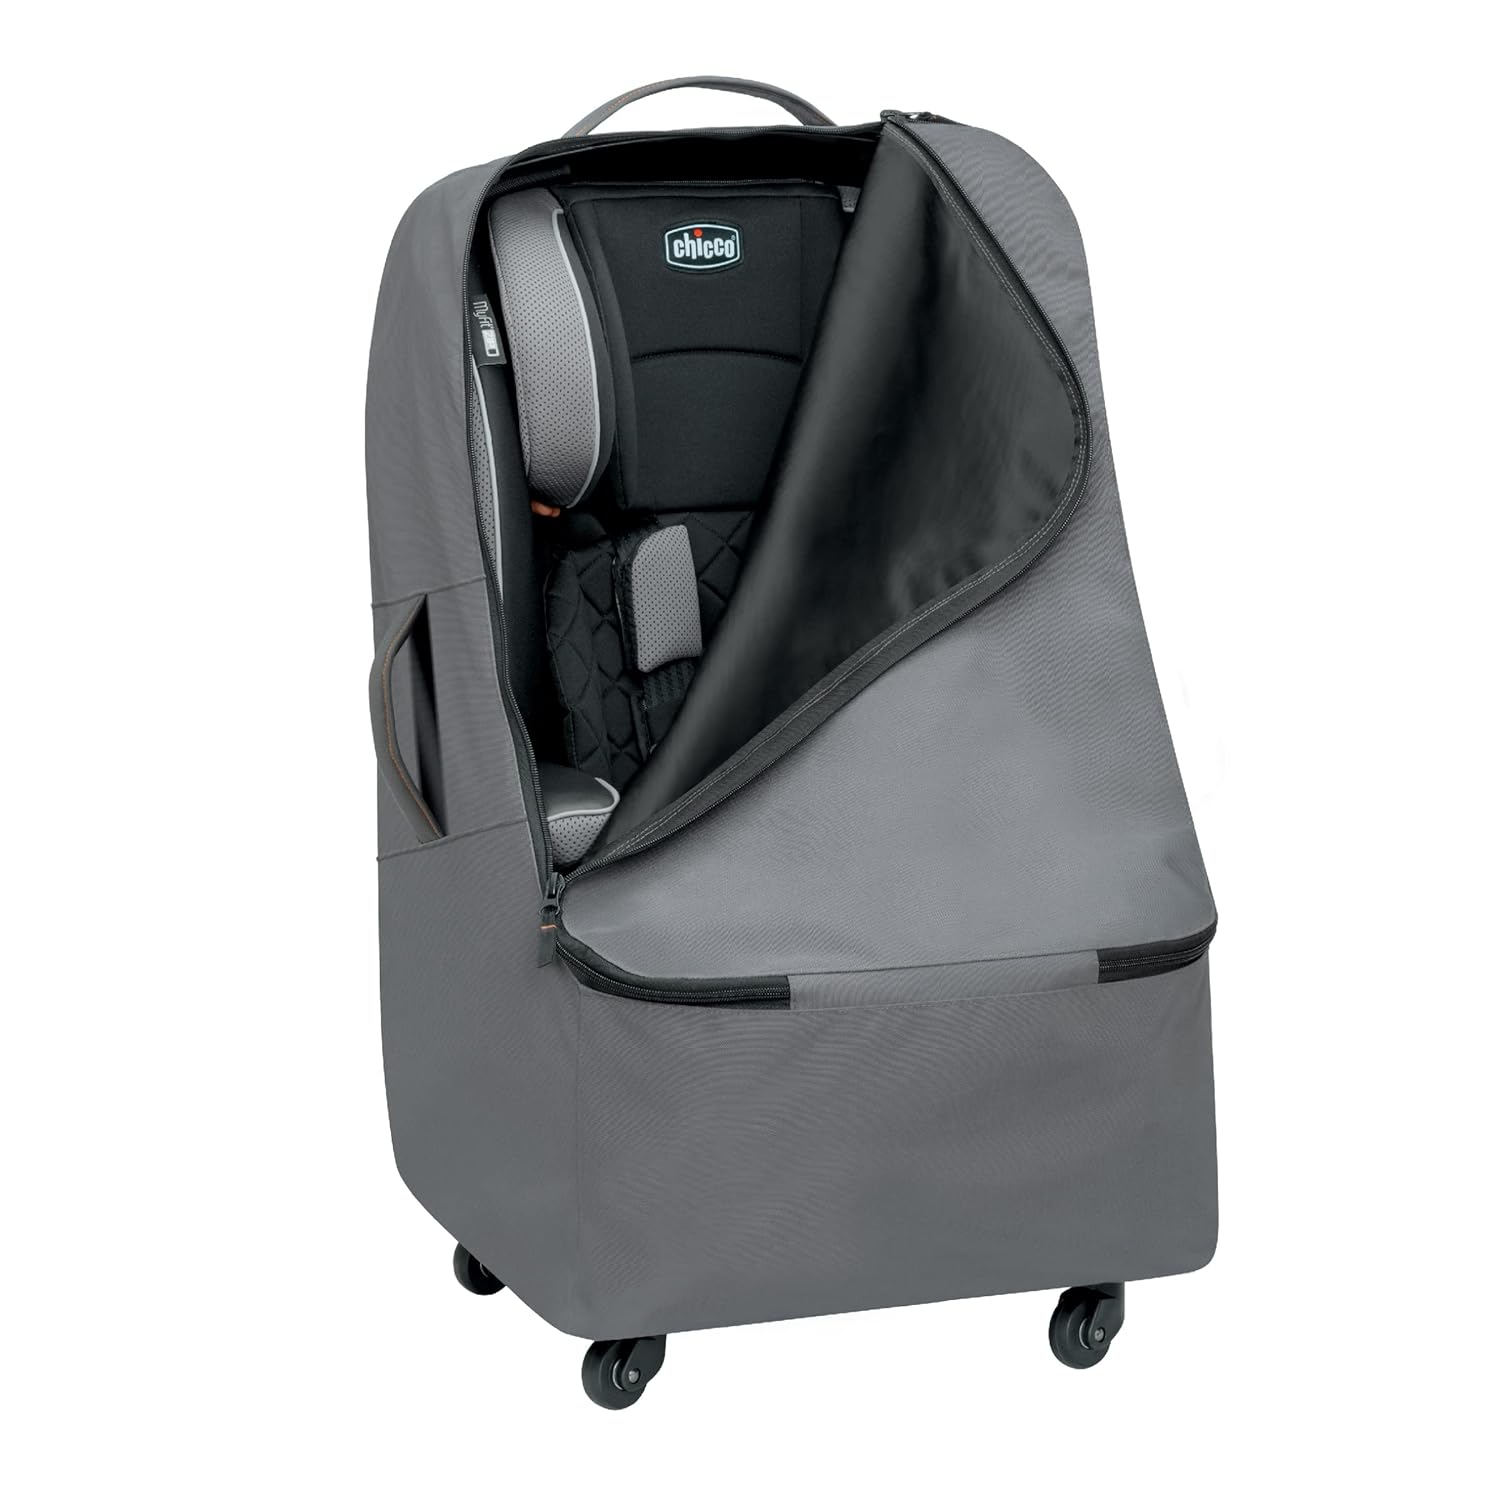 Chicco Car Seat Travel Bag - Anthracite | Grey